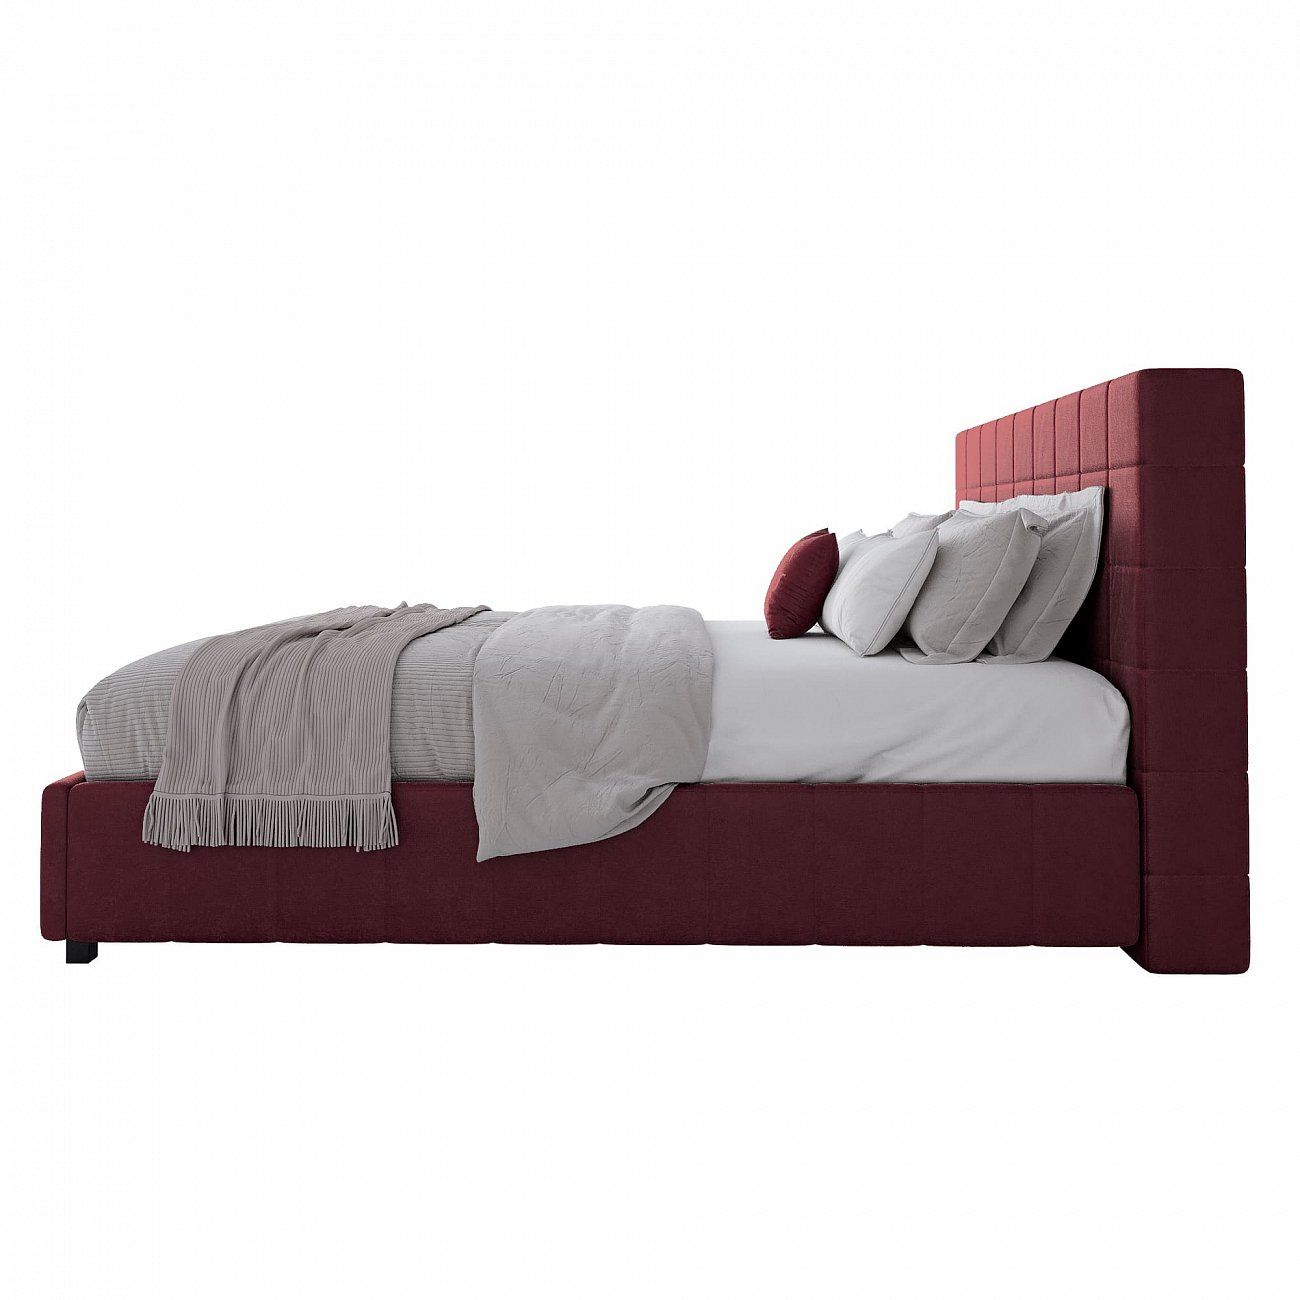 Double bed 180x200 cm red Shining Modern